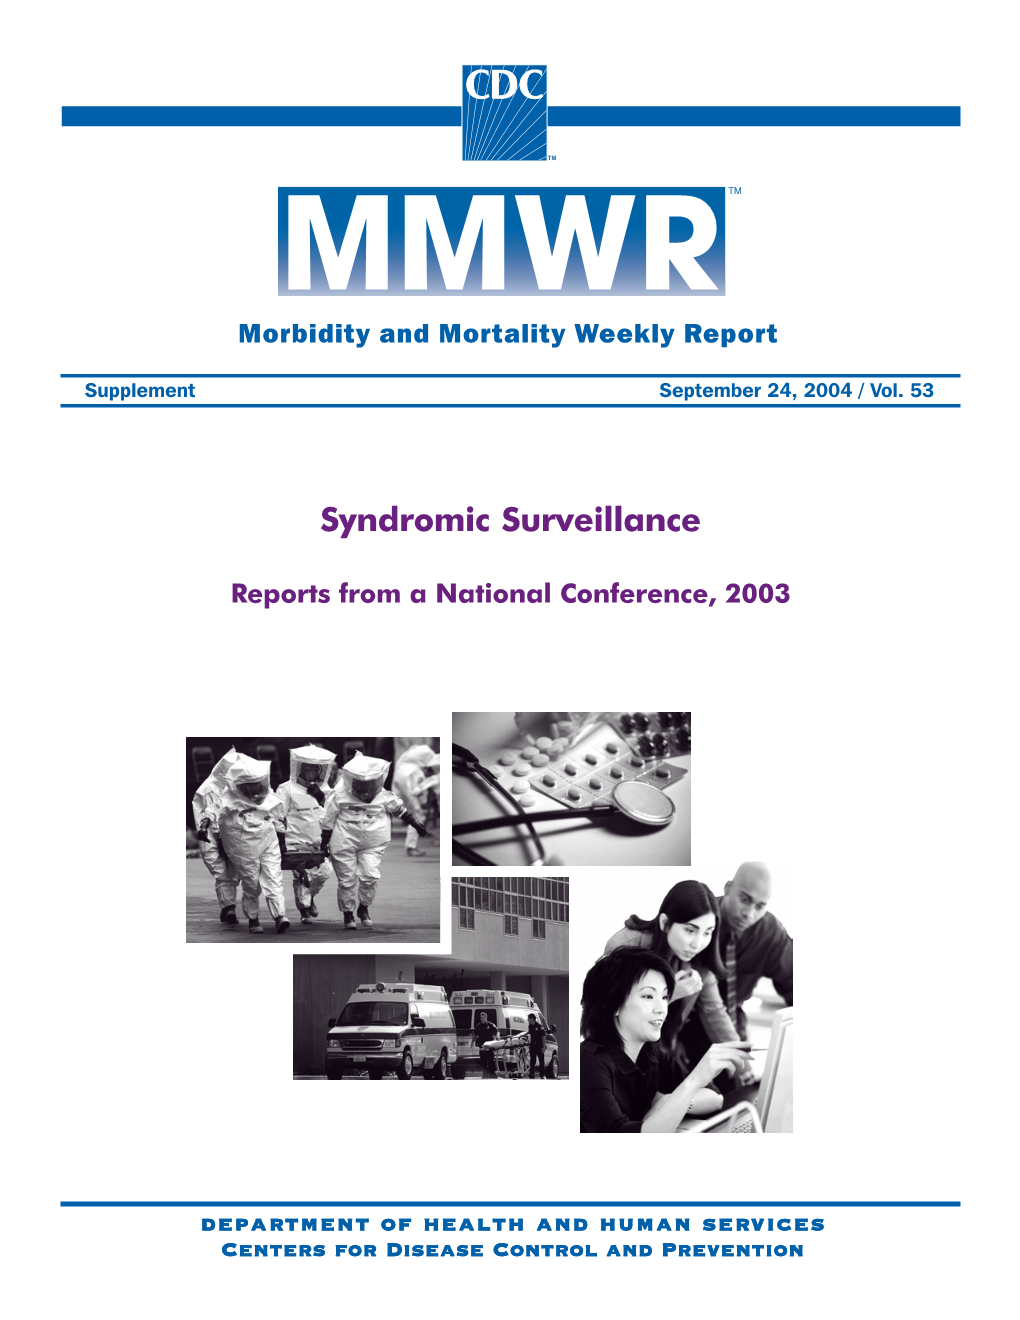 Syndromic Surveillance, Reports